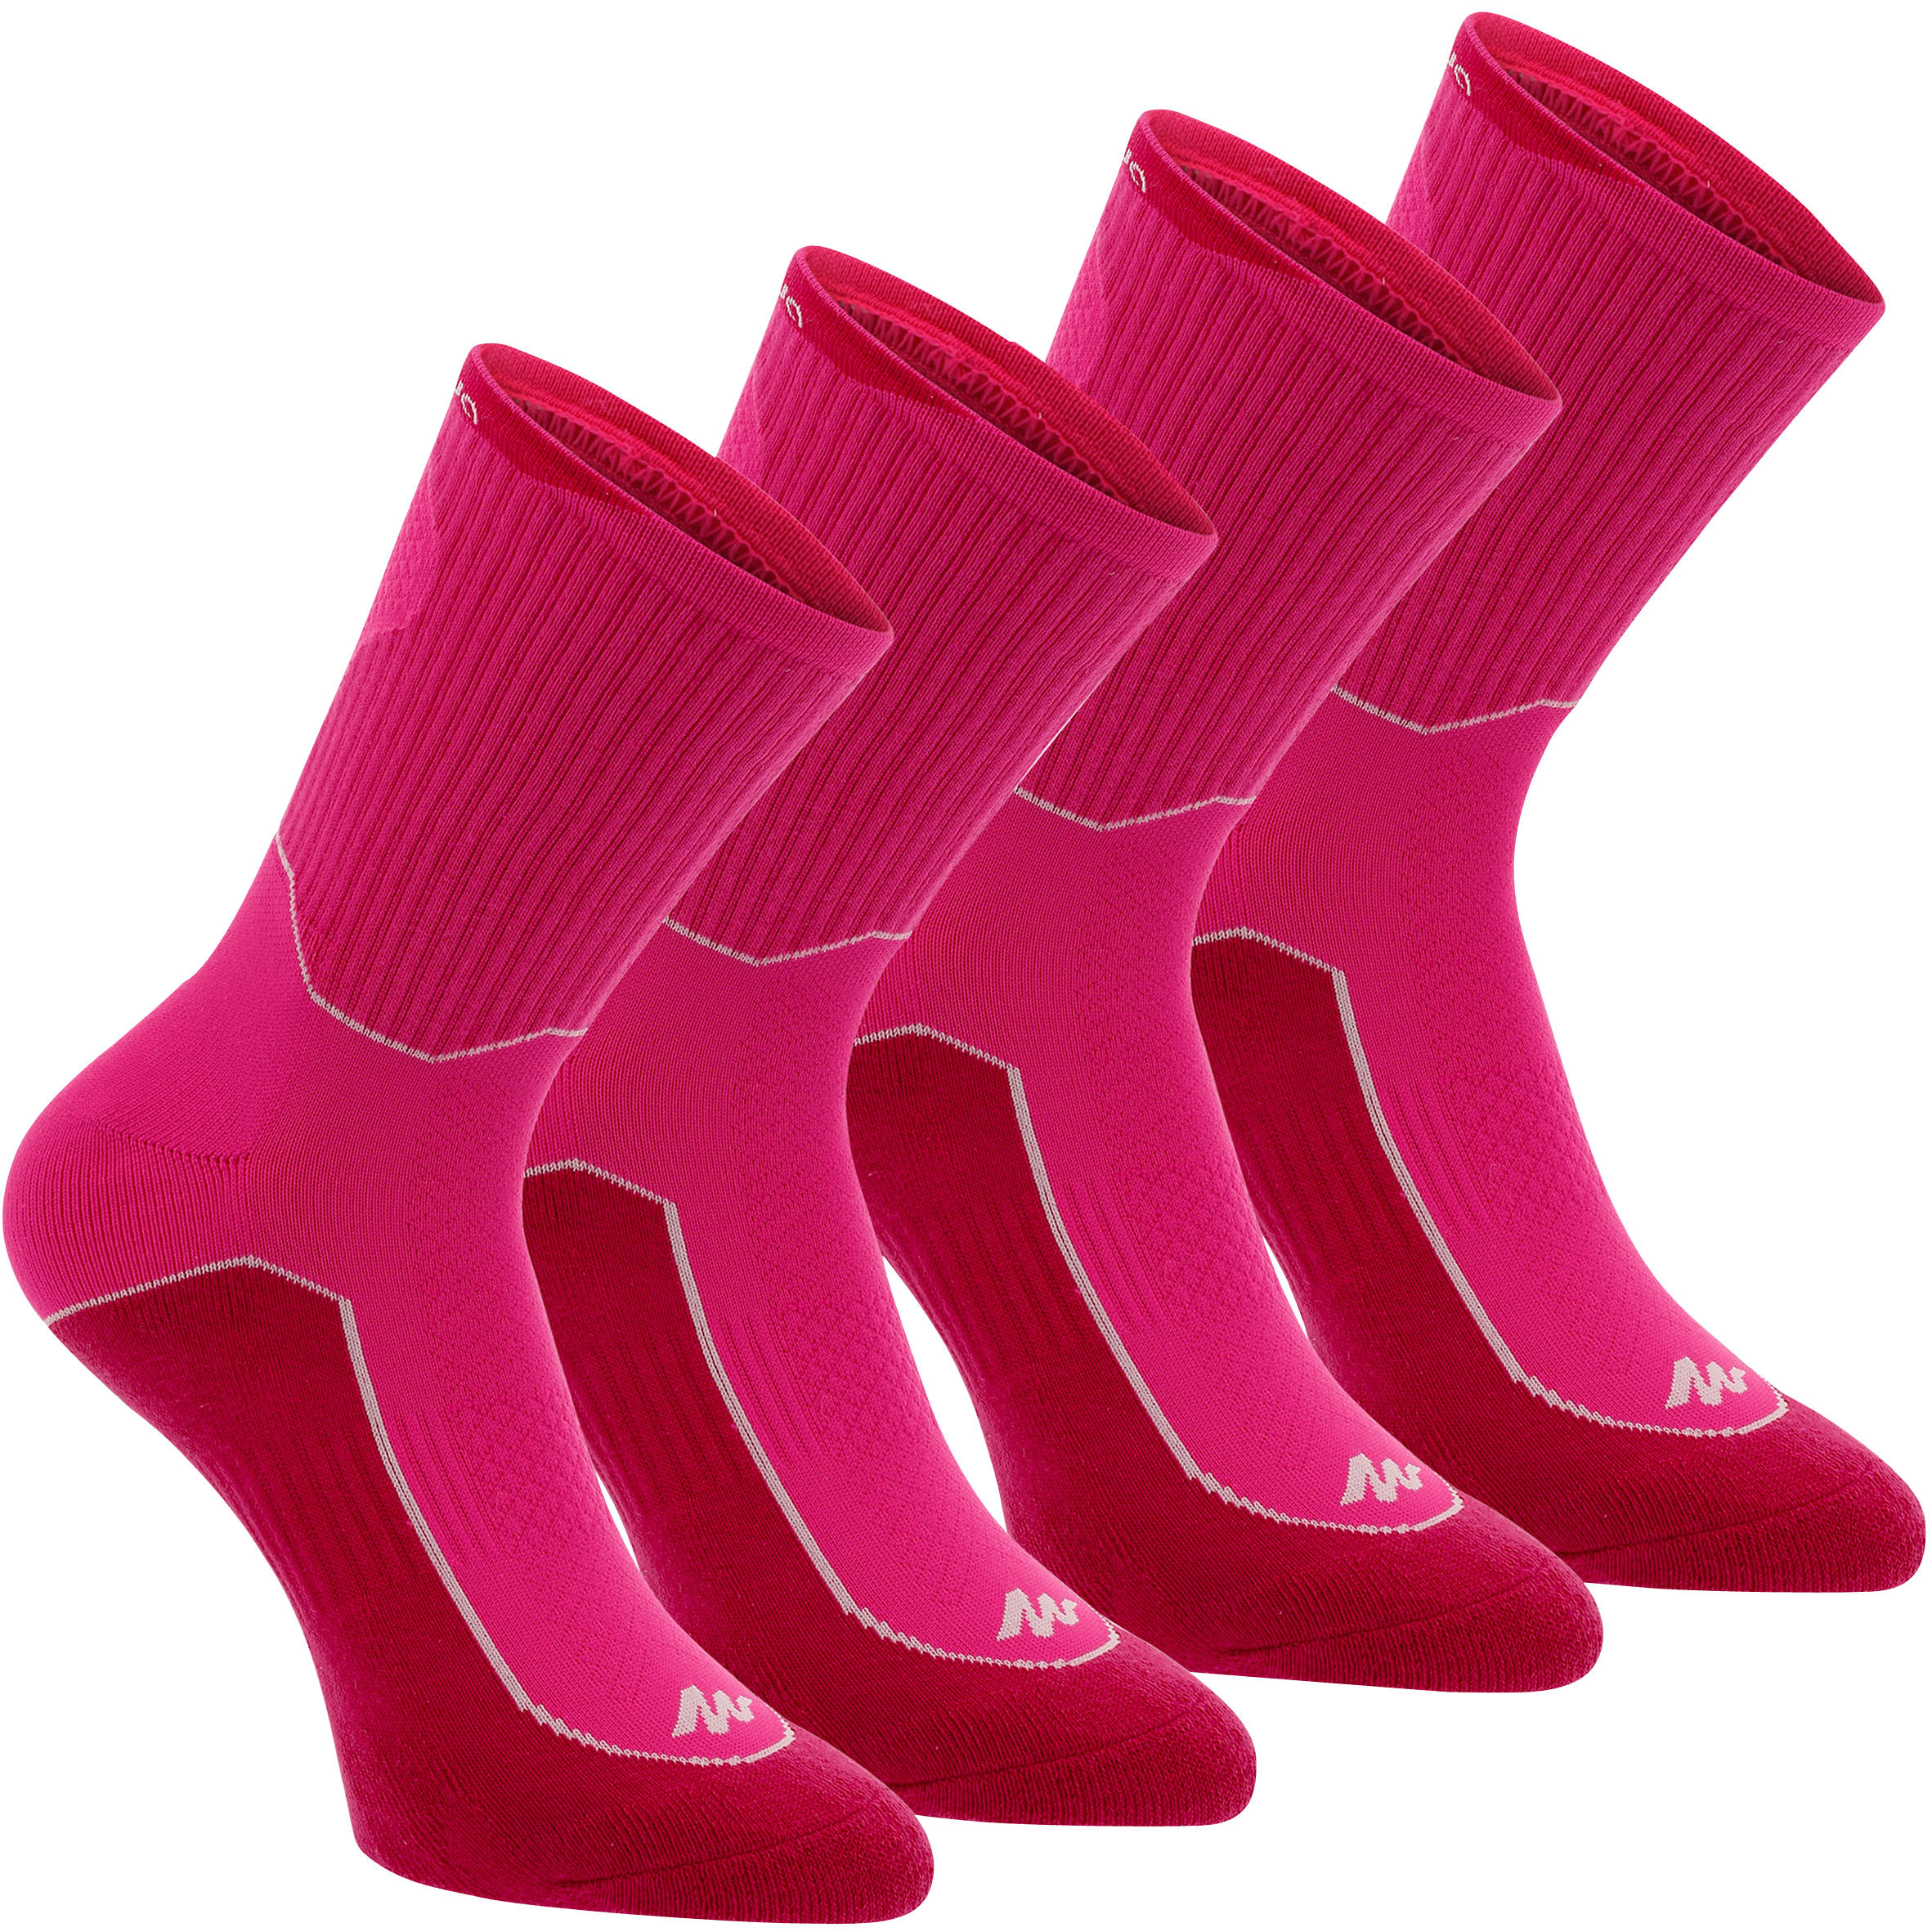 QUECHUA 2 pairs of high length adult Arpenaz 100 mountain hiking socks - Pink